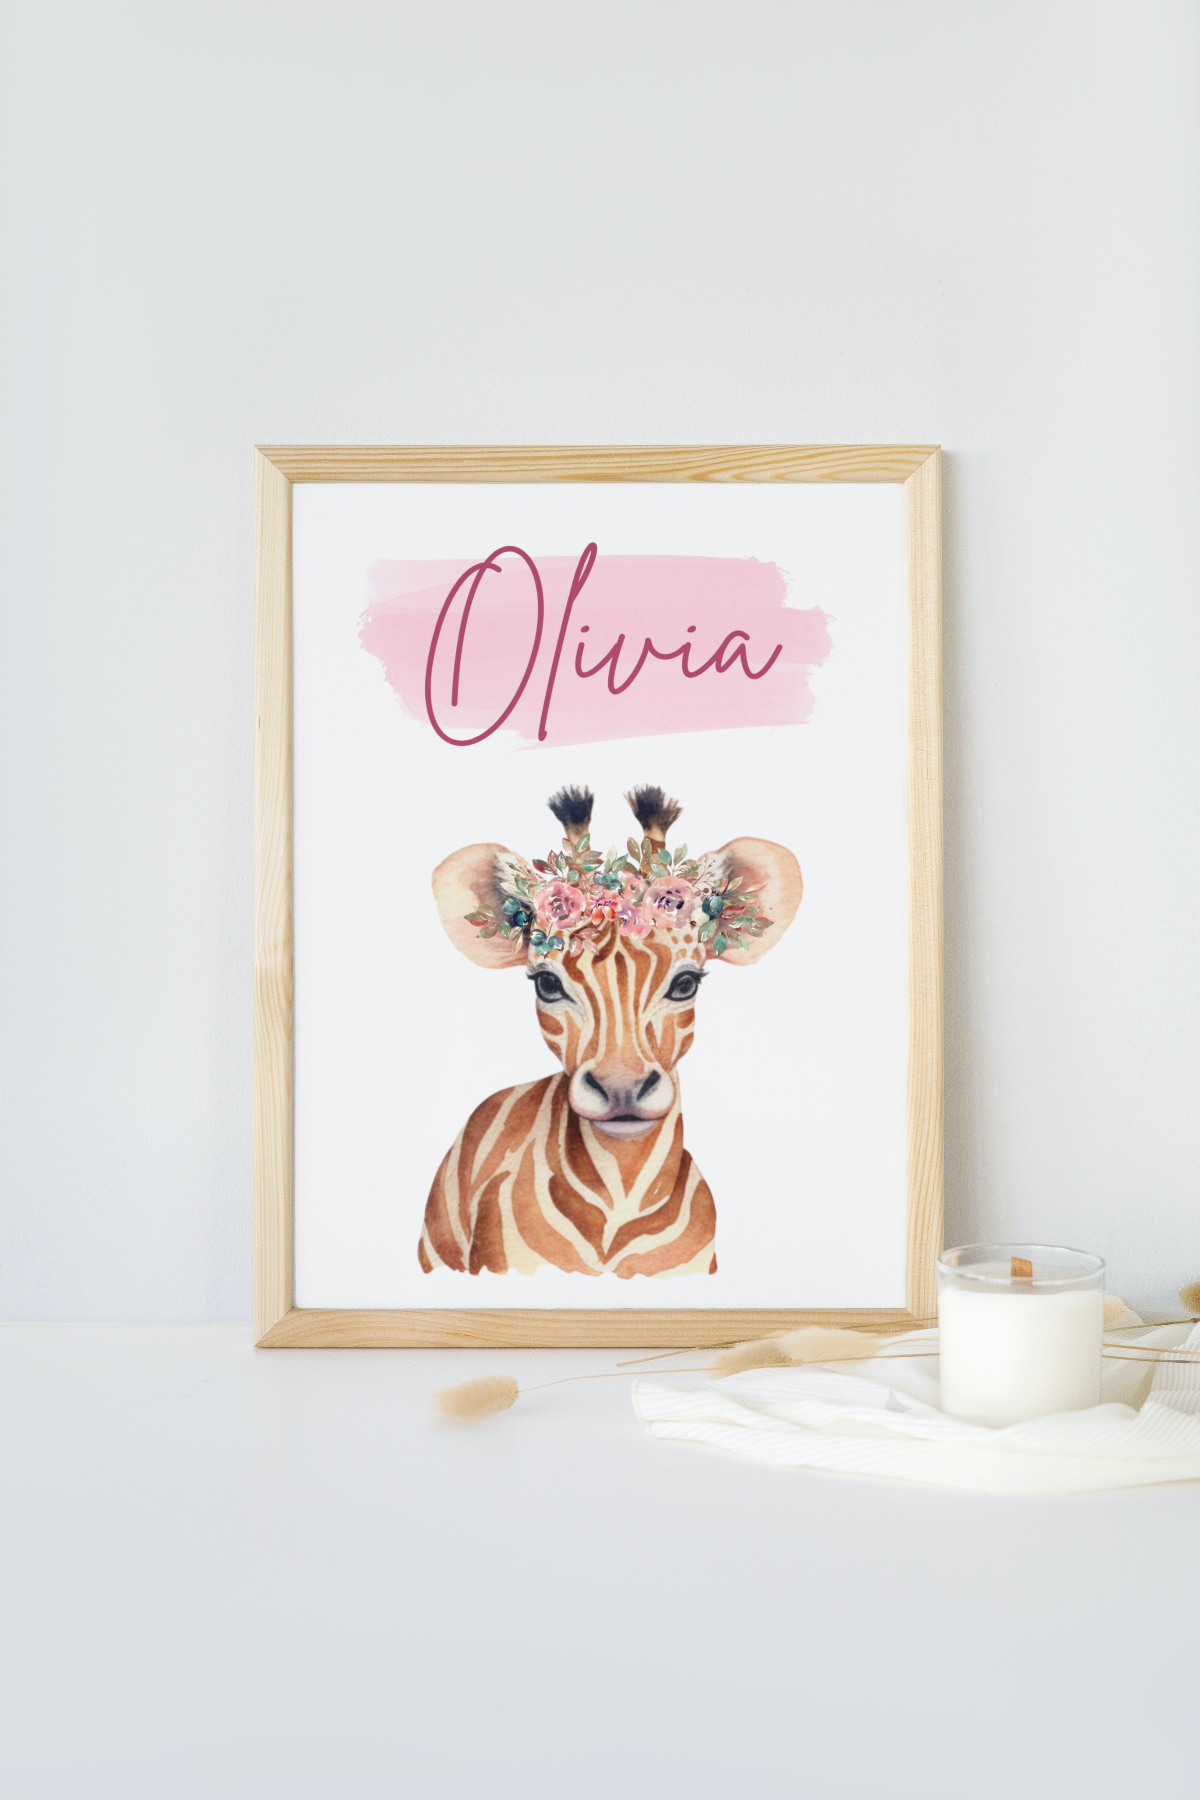 Giraffe image with personalised baby name